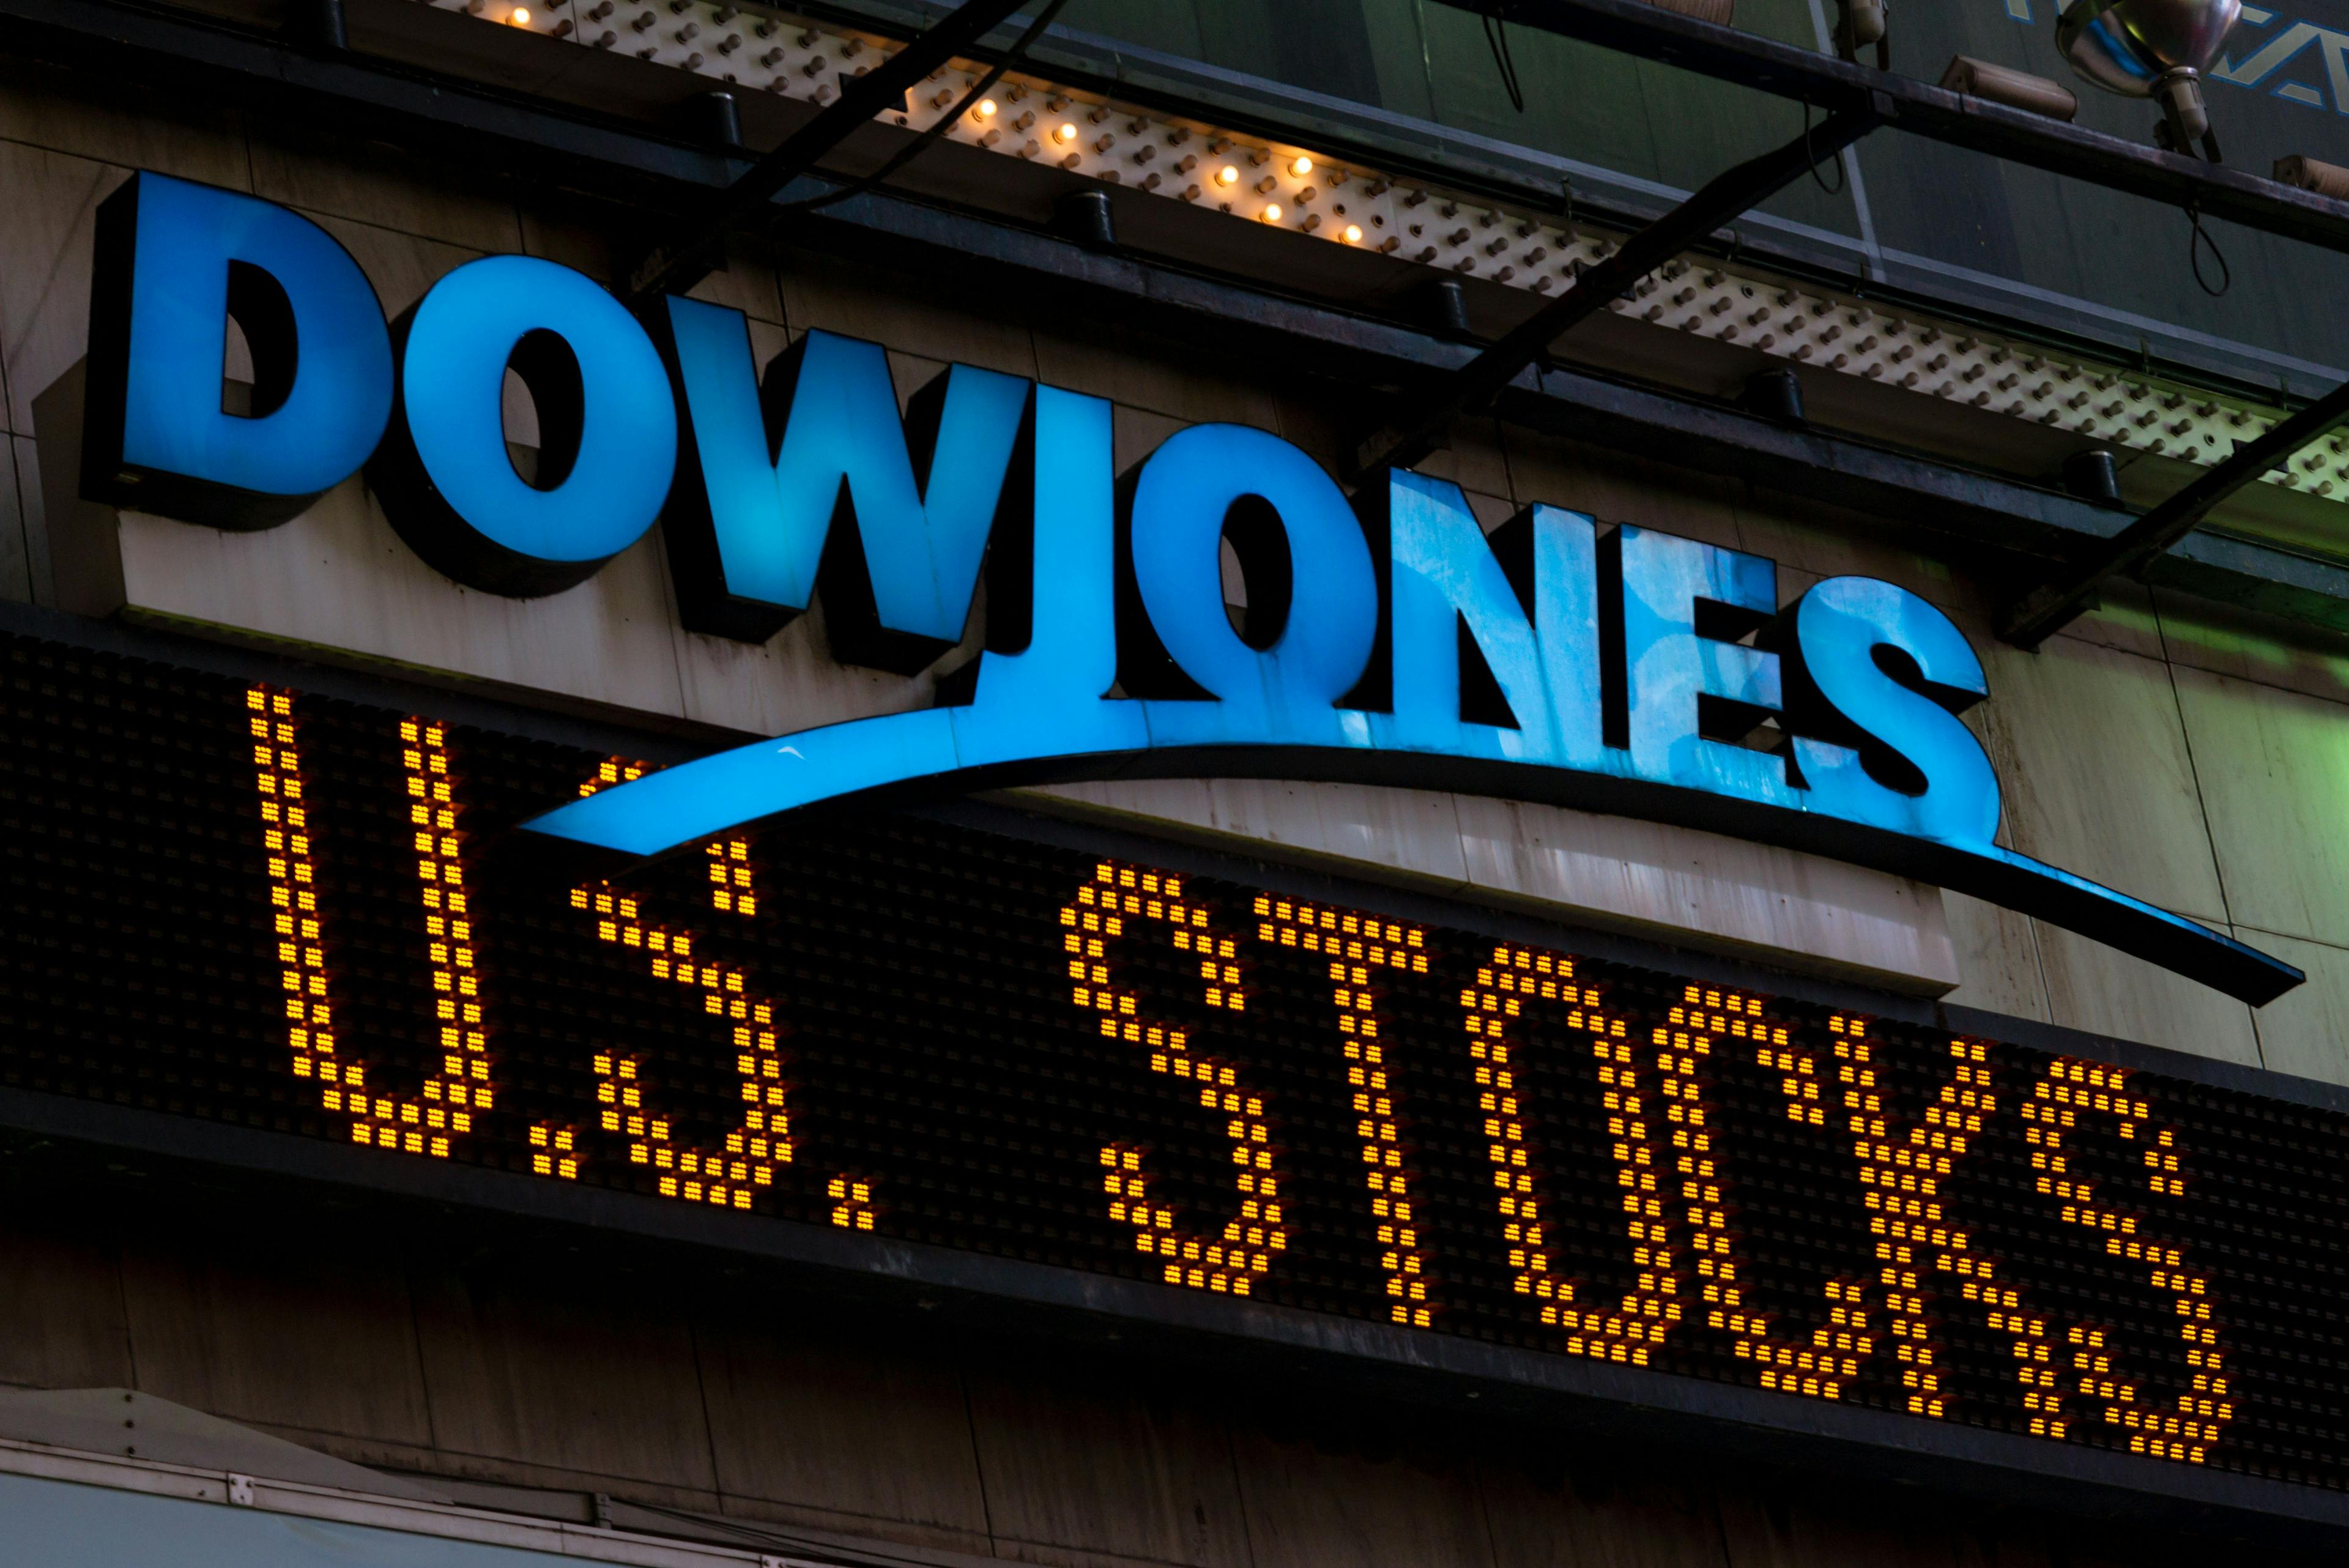 A Dow Jones sign in Times Square